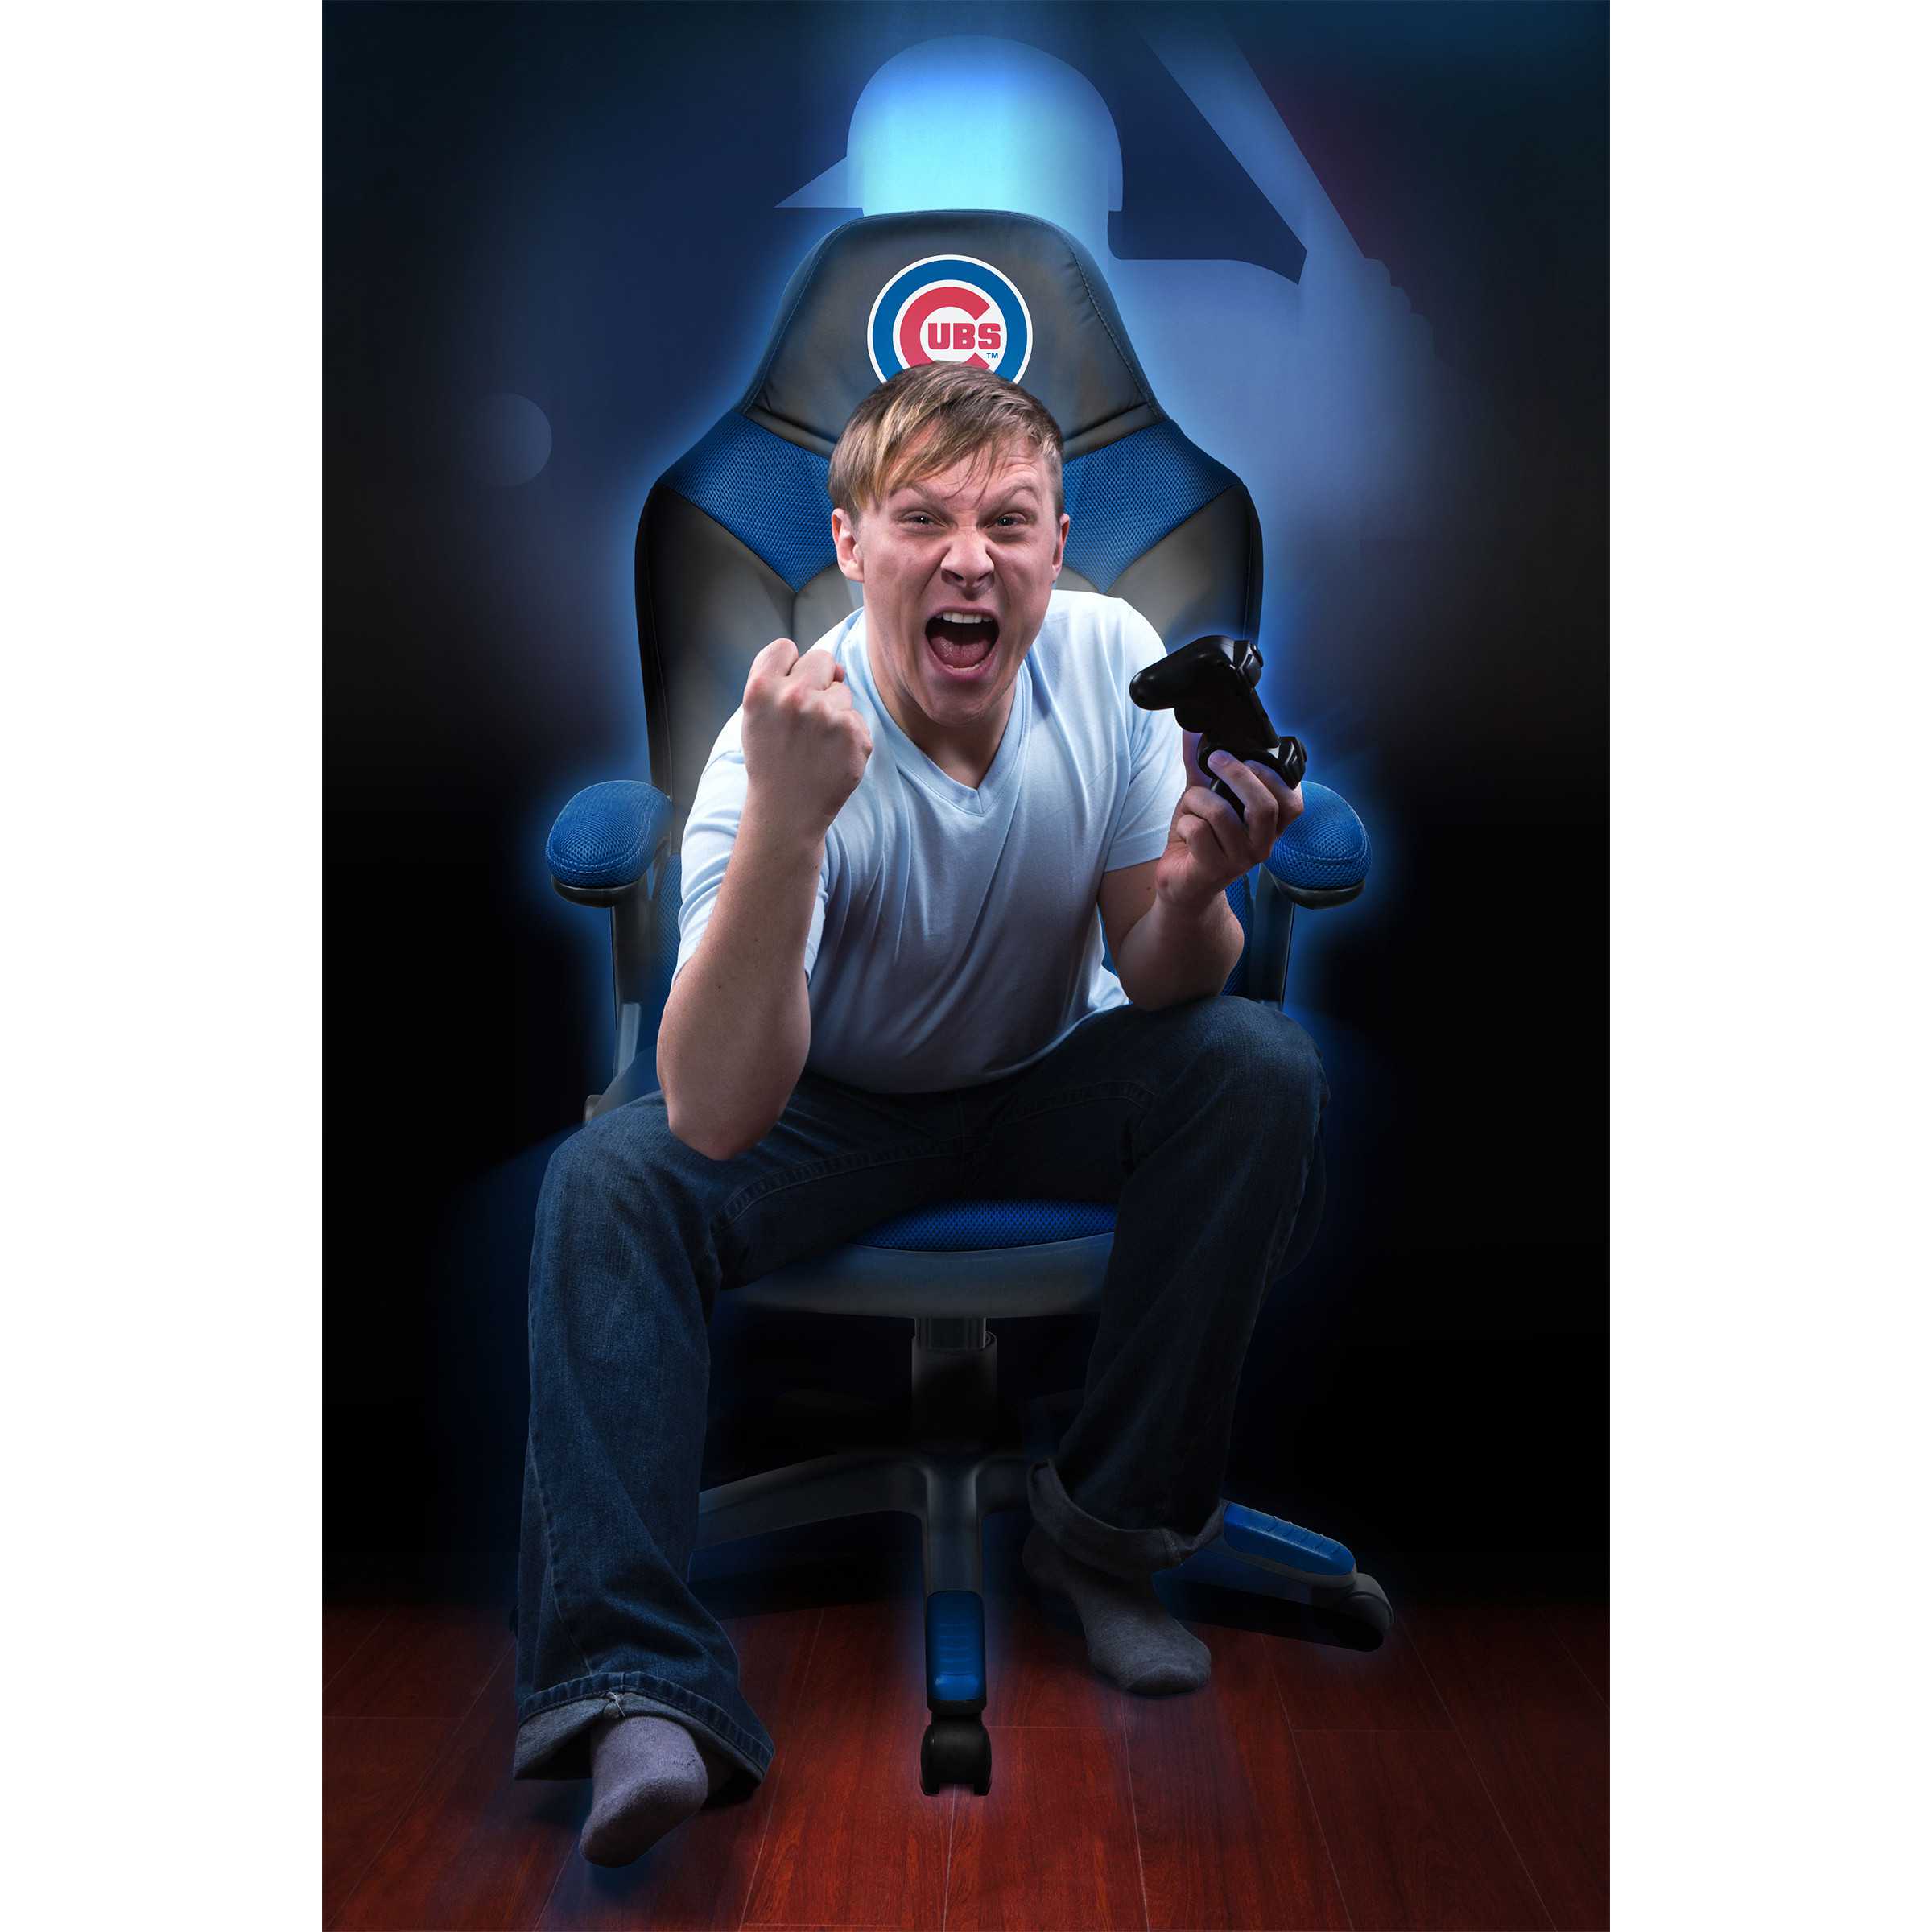 CHICAGO CUBS OVERSIZED GAMING CHAIR